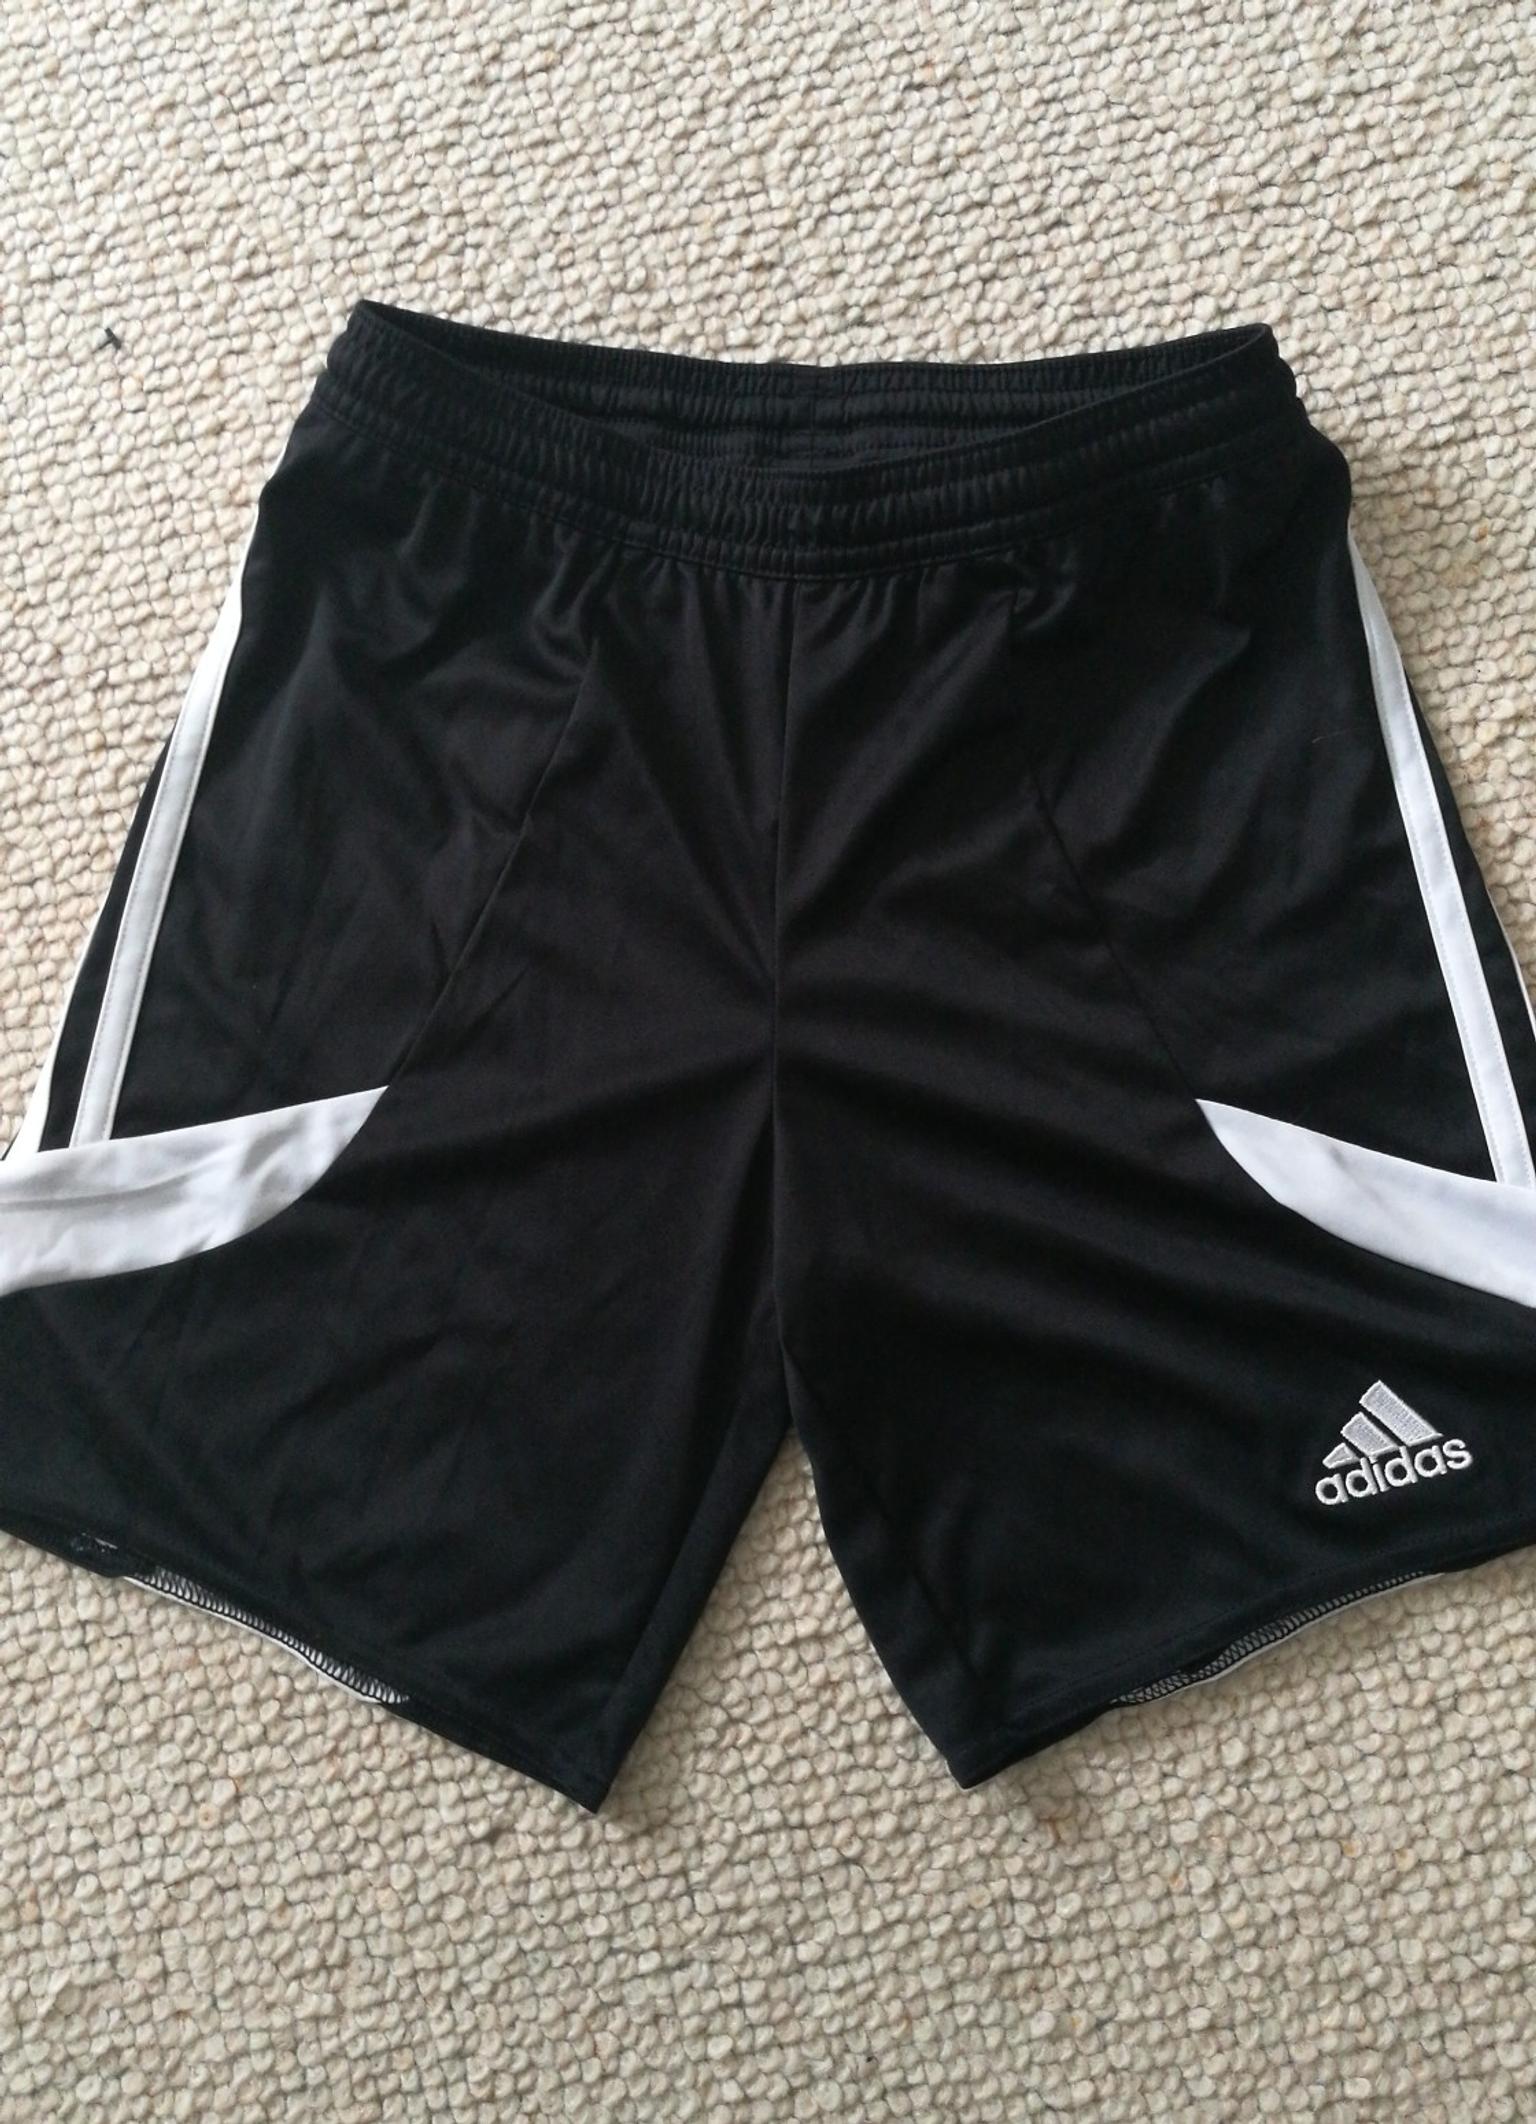 Adidas climalite shorts in BR3 Bromley 